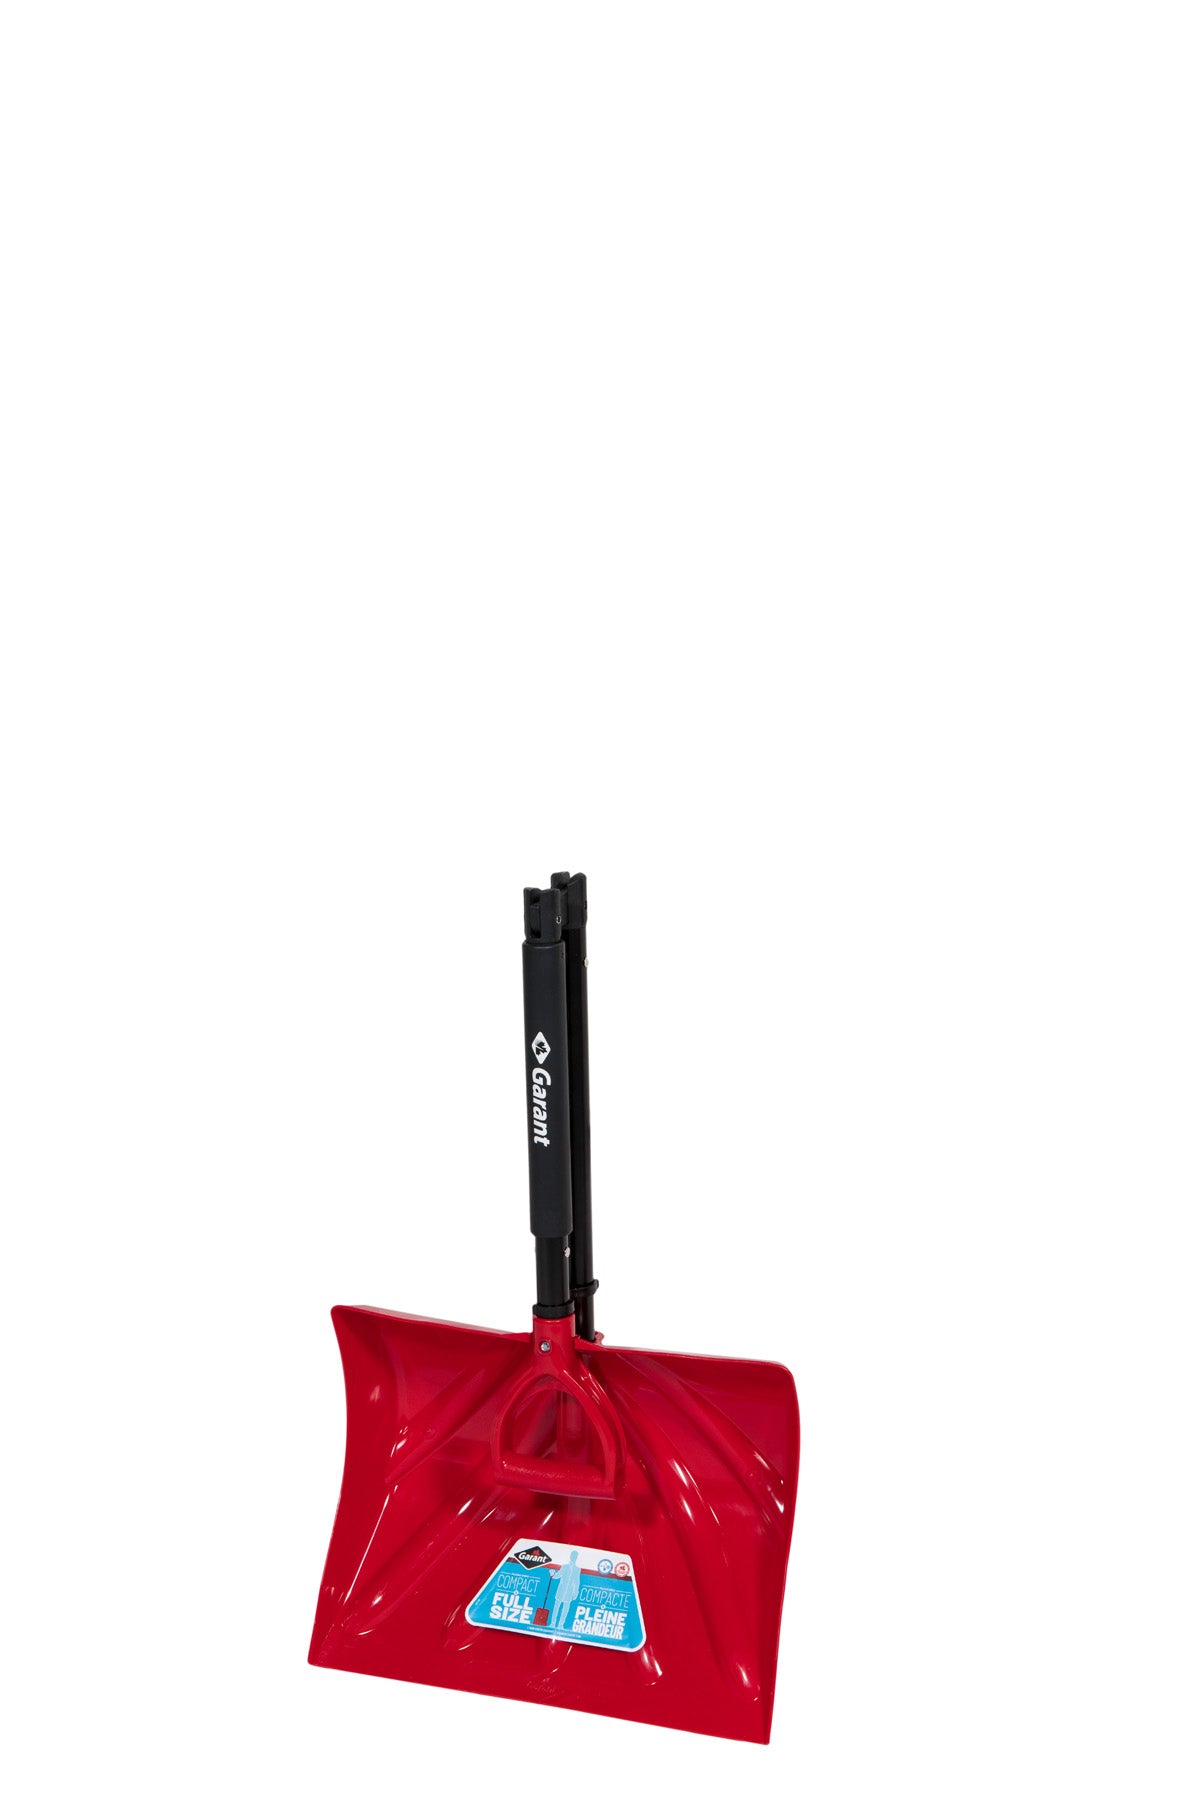 Foldable snow shovel,18 in. poly blade